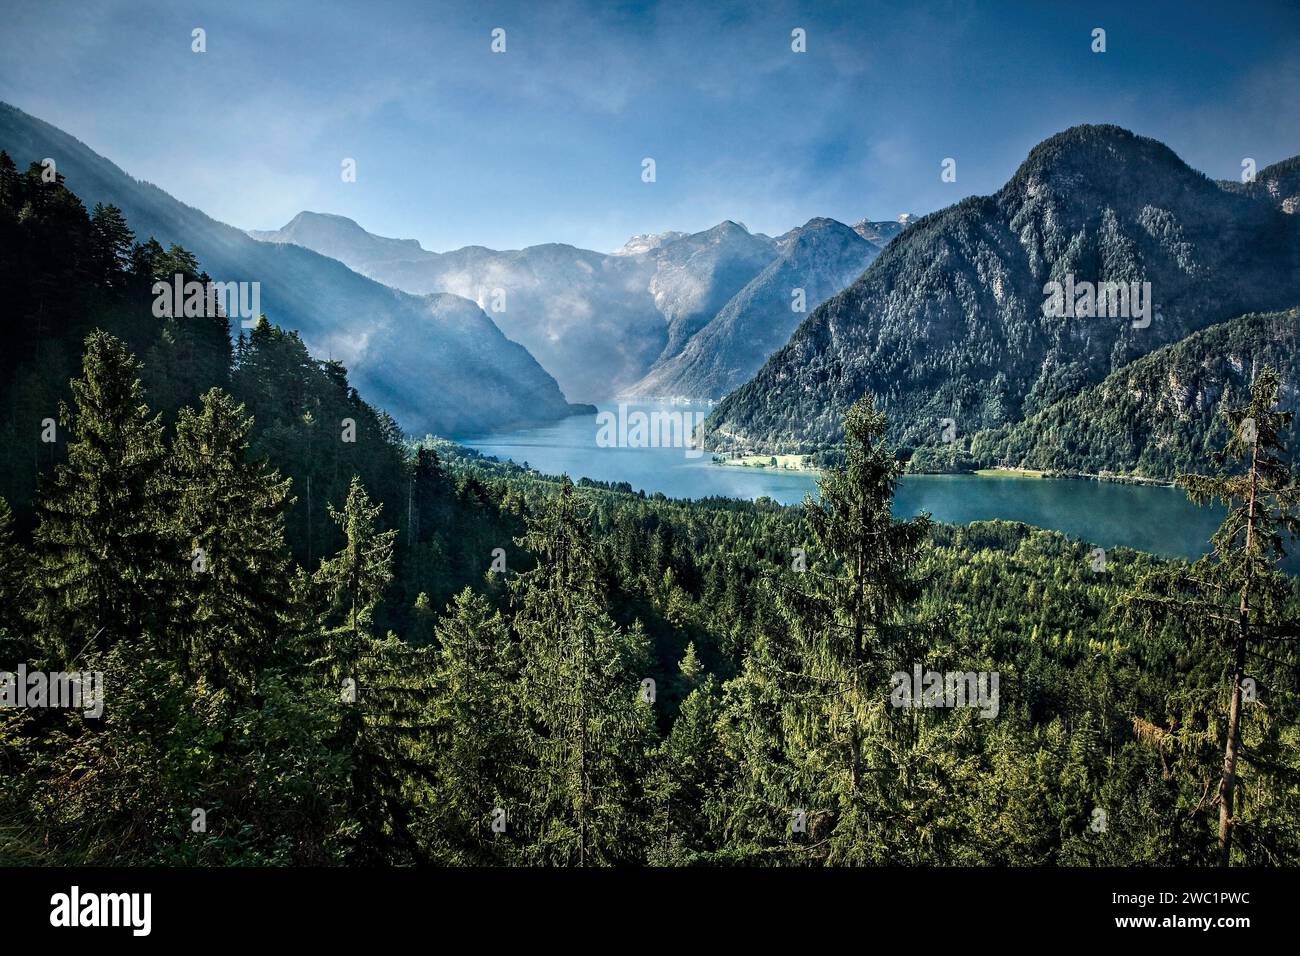 The Hallstatter See in the Salzkammergut area of the Austria Alps. Stock Photo